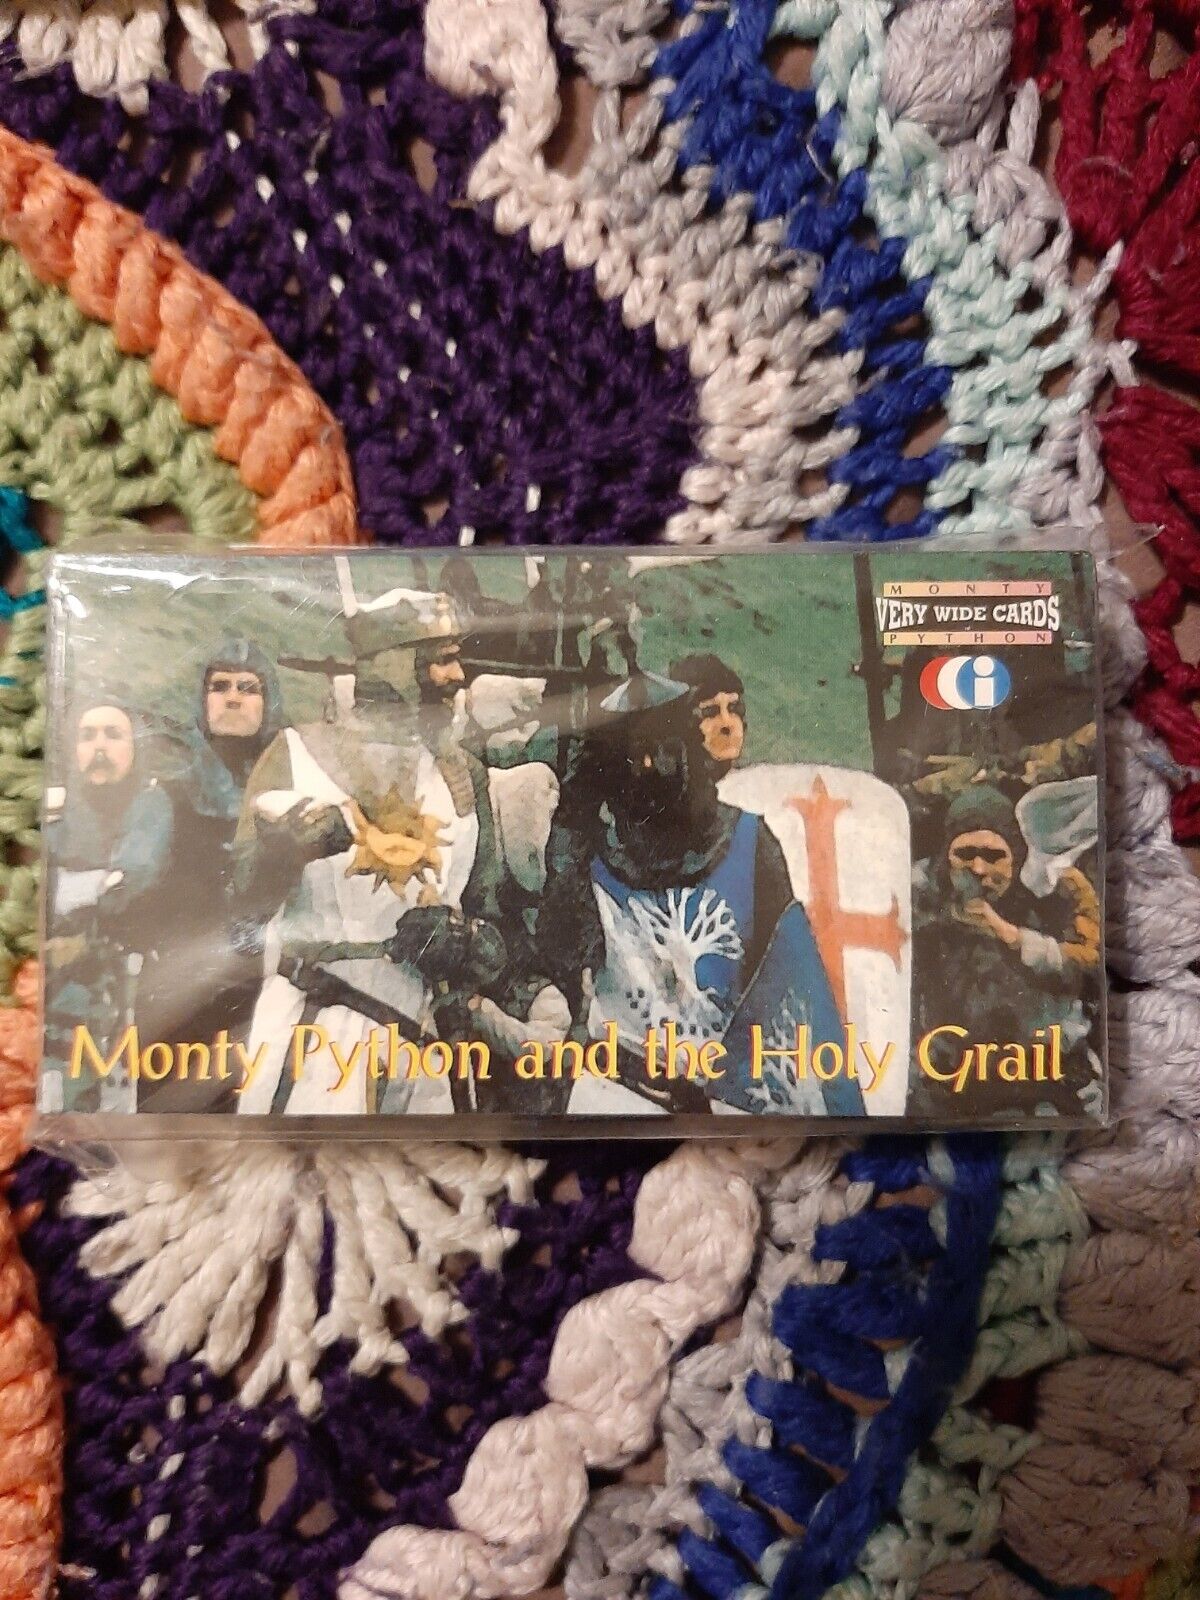 1996 Monty Python and the Holy Grail - Very Wide Cards - Complete Set of 72